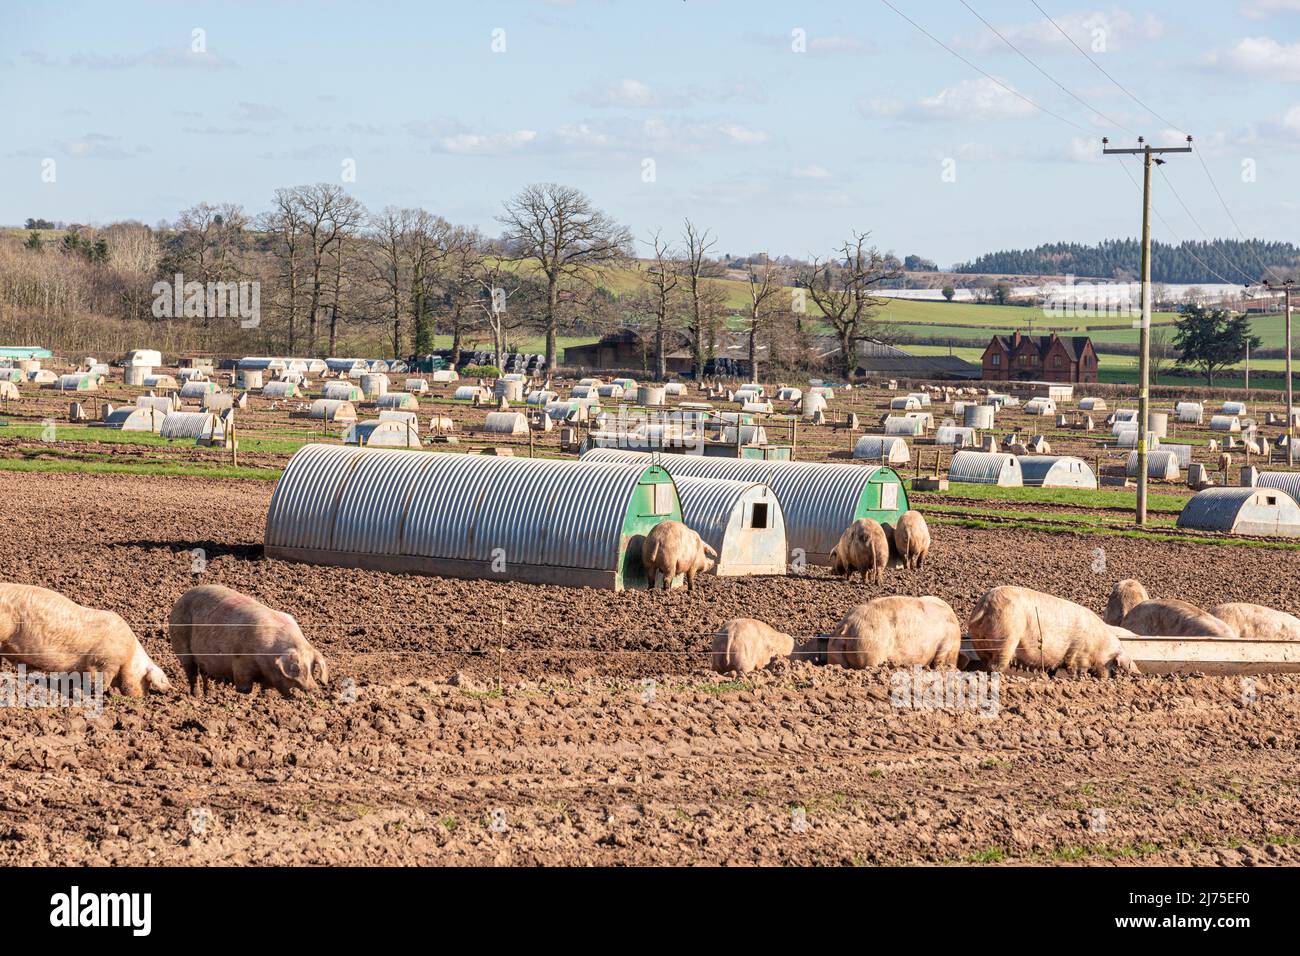 High density outdoor pig farming at Brooms Green on the Gloucestershire - Herefordshire border, England UK Stock Photo